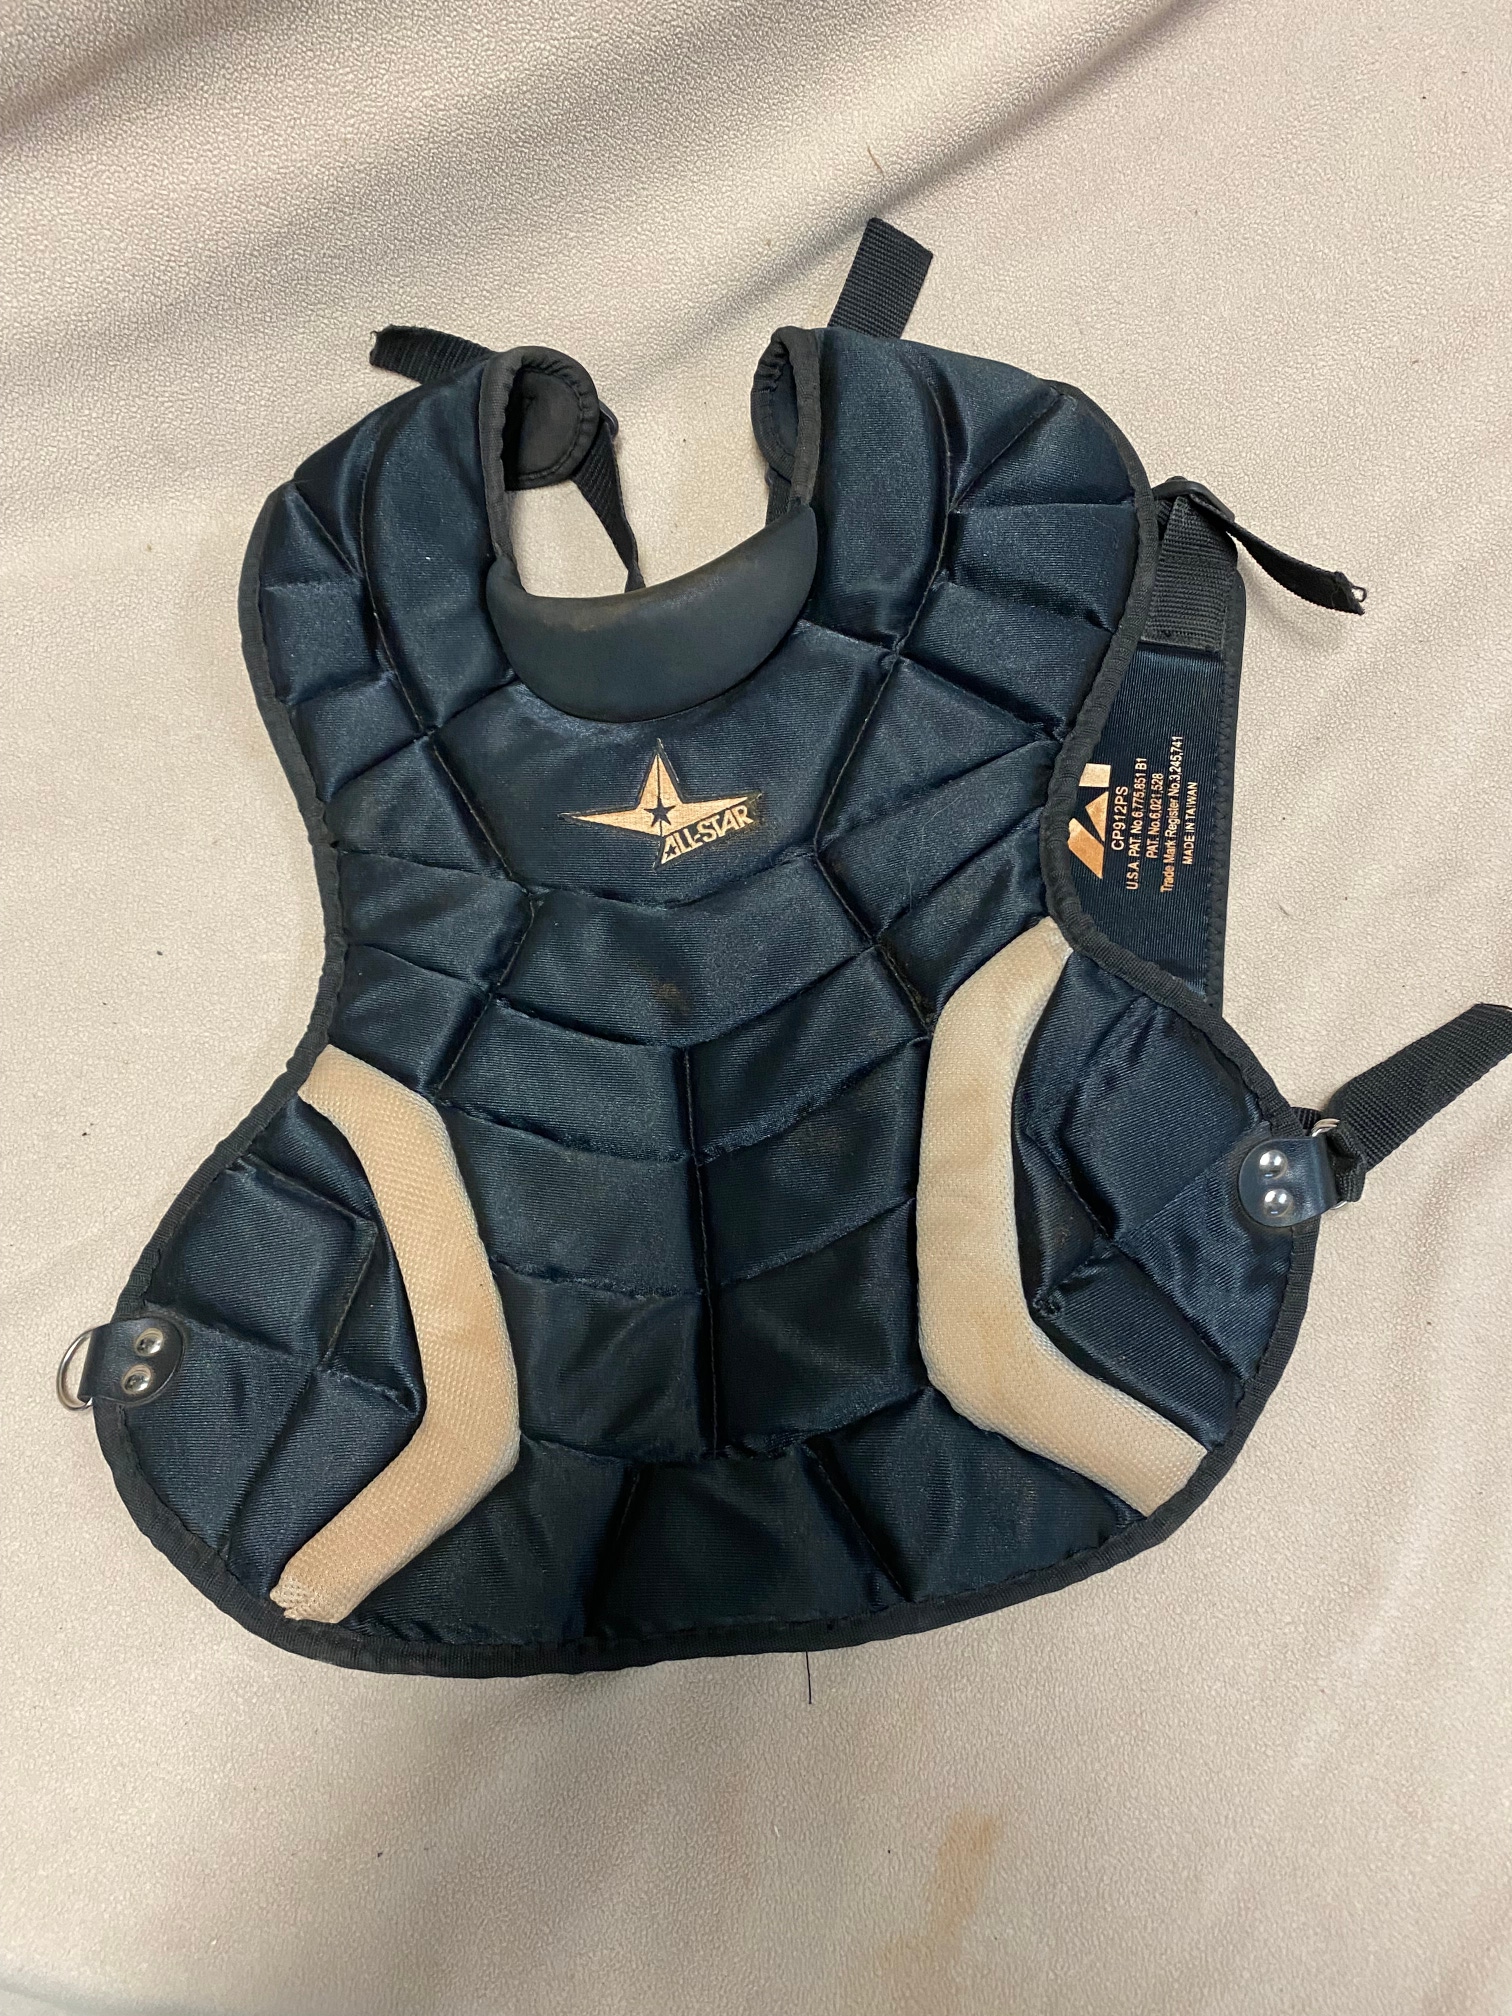 Used All Star Catcher's Chest Protector